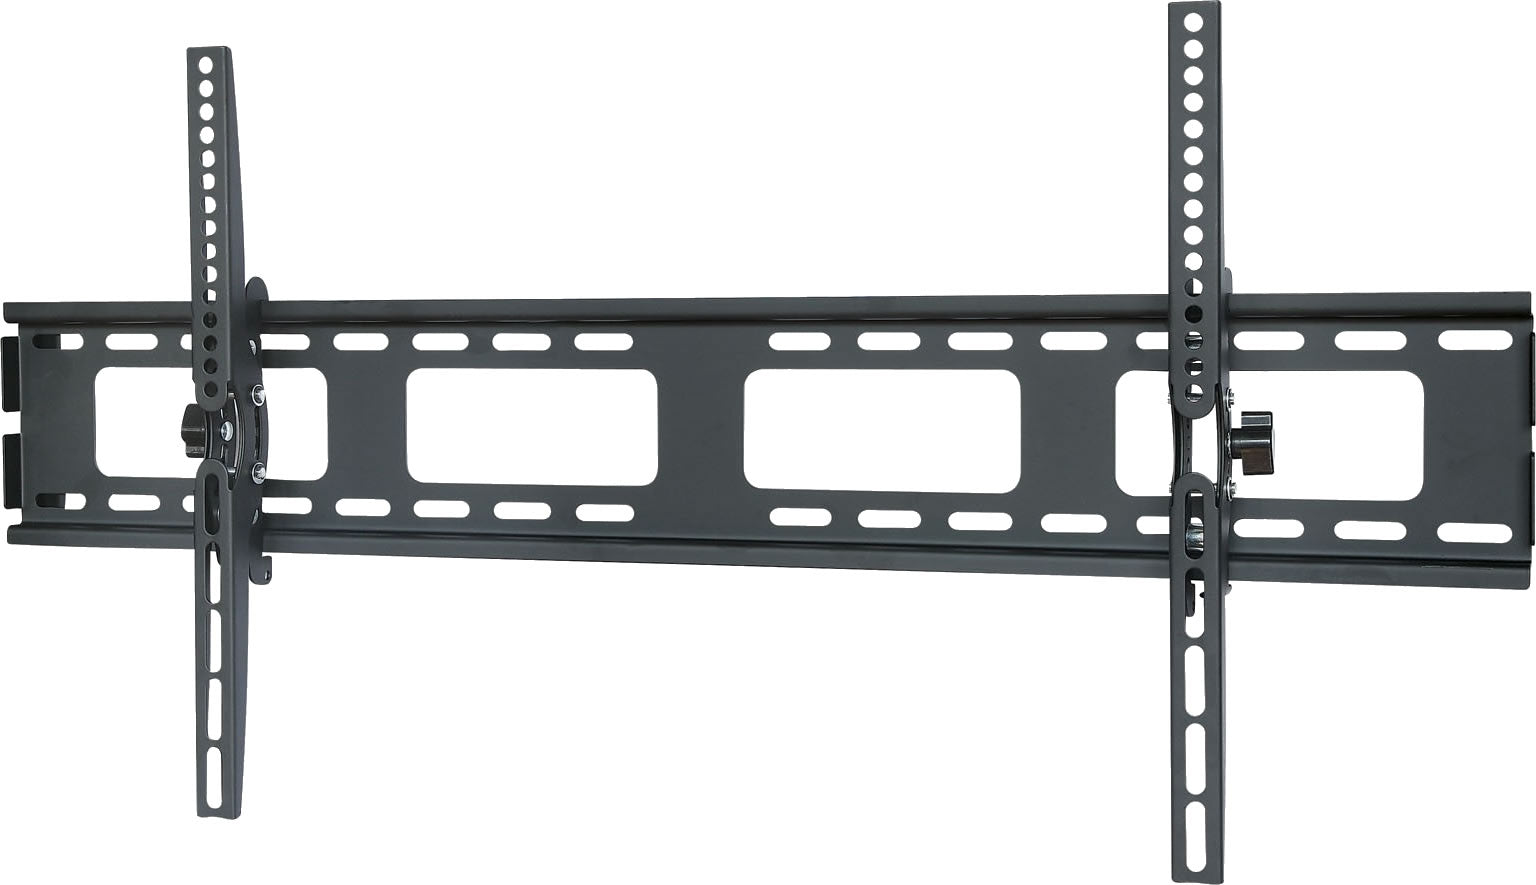 64-1131XL Tilt LCD LED TV / Monitor Wall Mount Bracket for 42-70 inches TVs